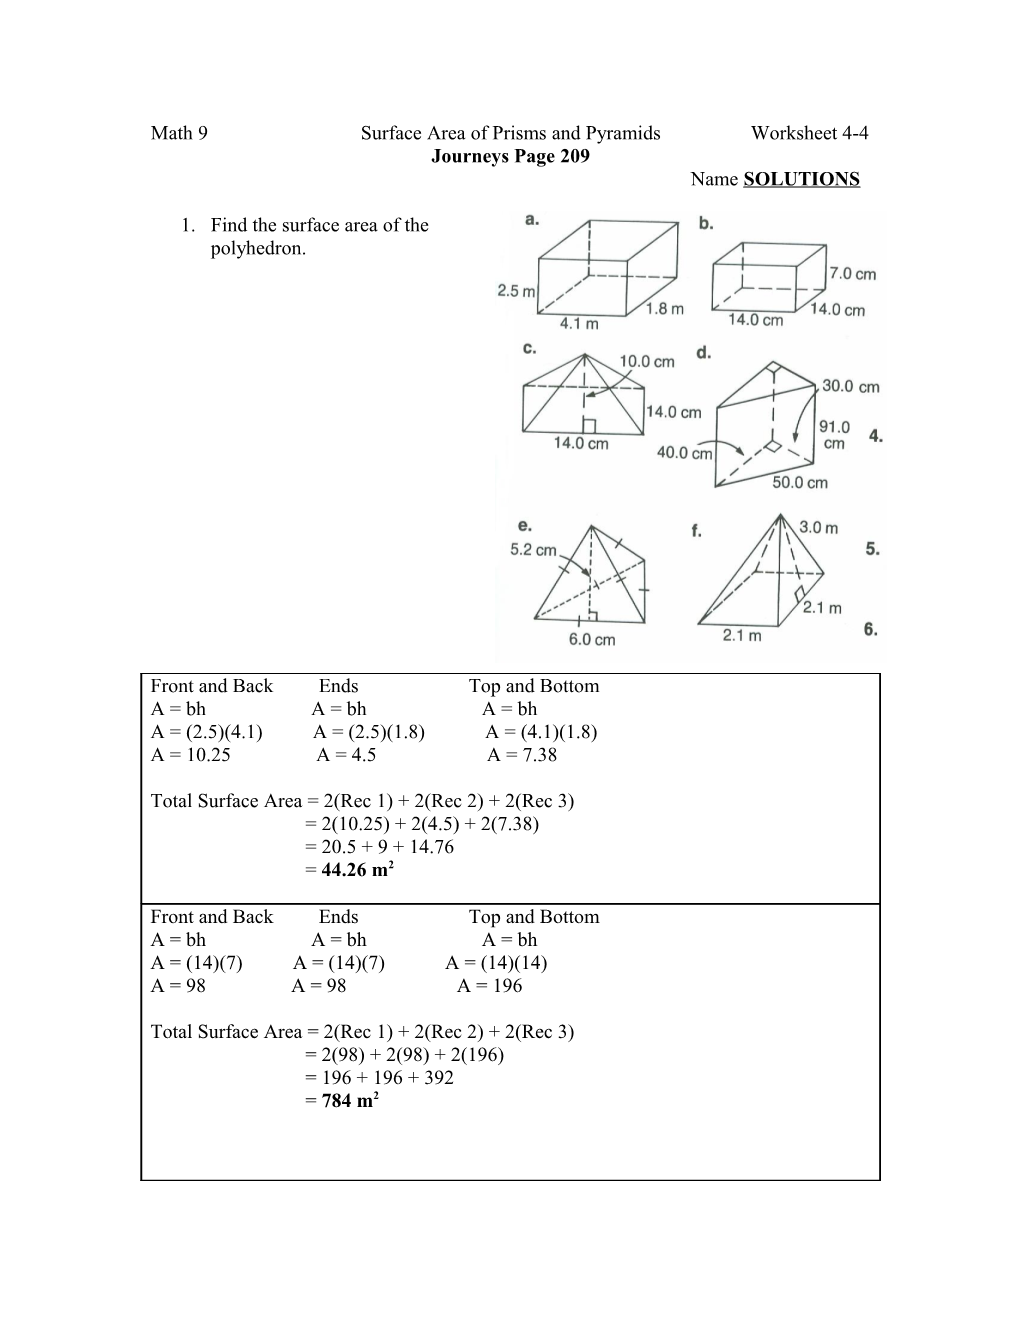 Math 9 Surface Area of Prisms and Pyramids Worksheet 4-4